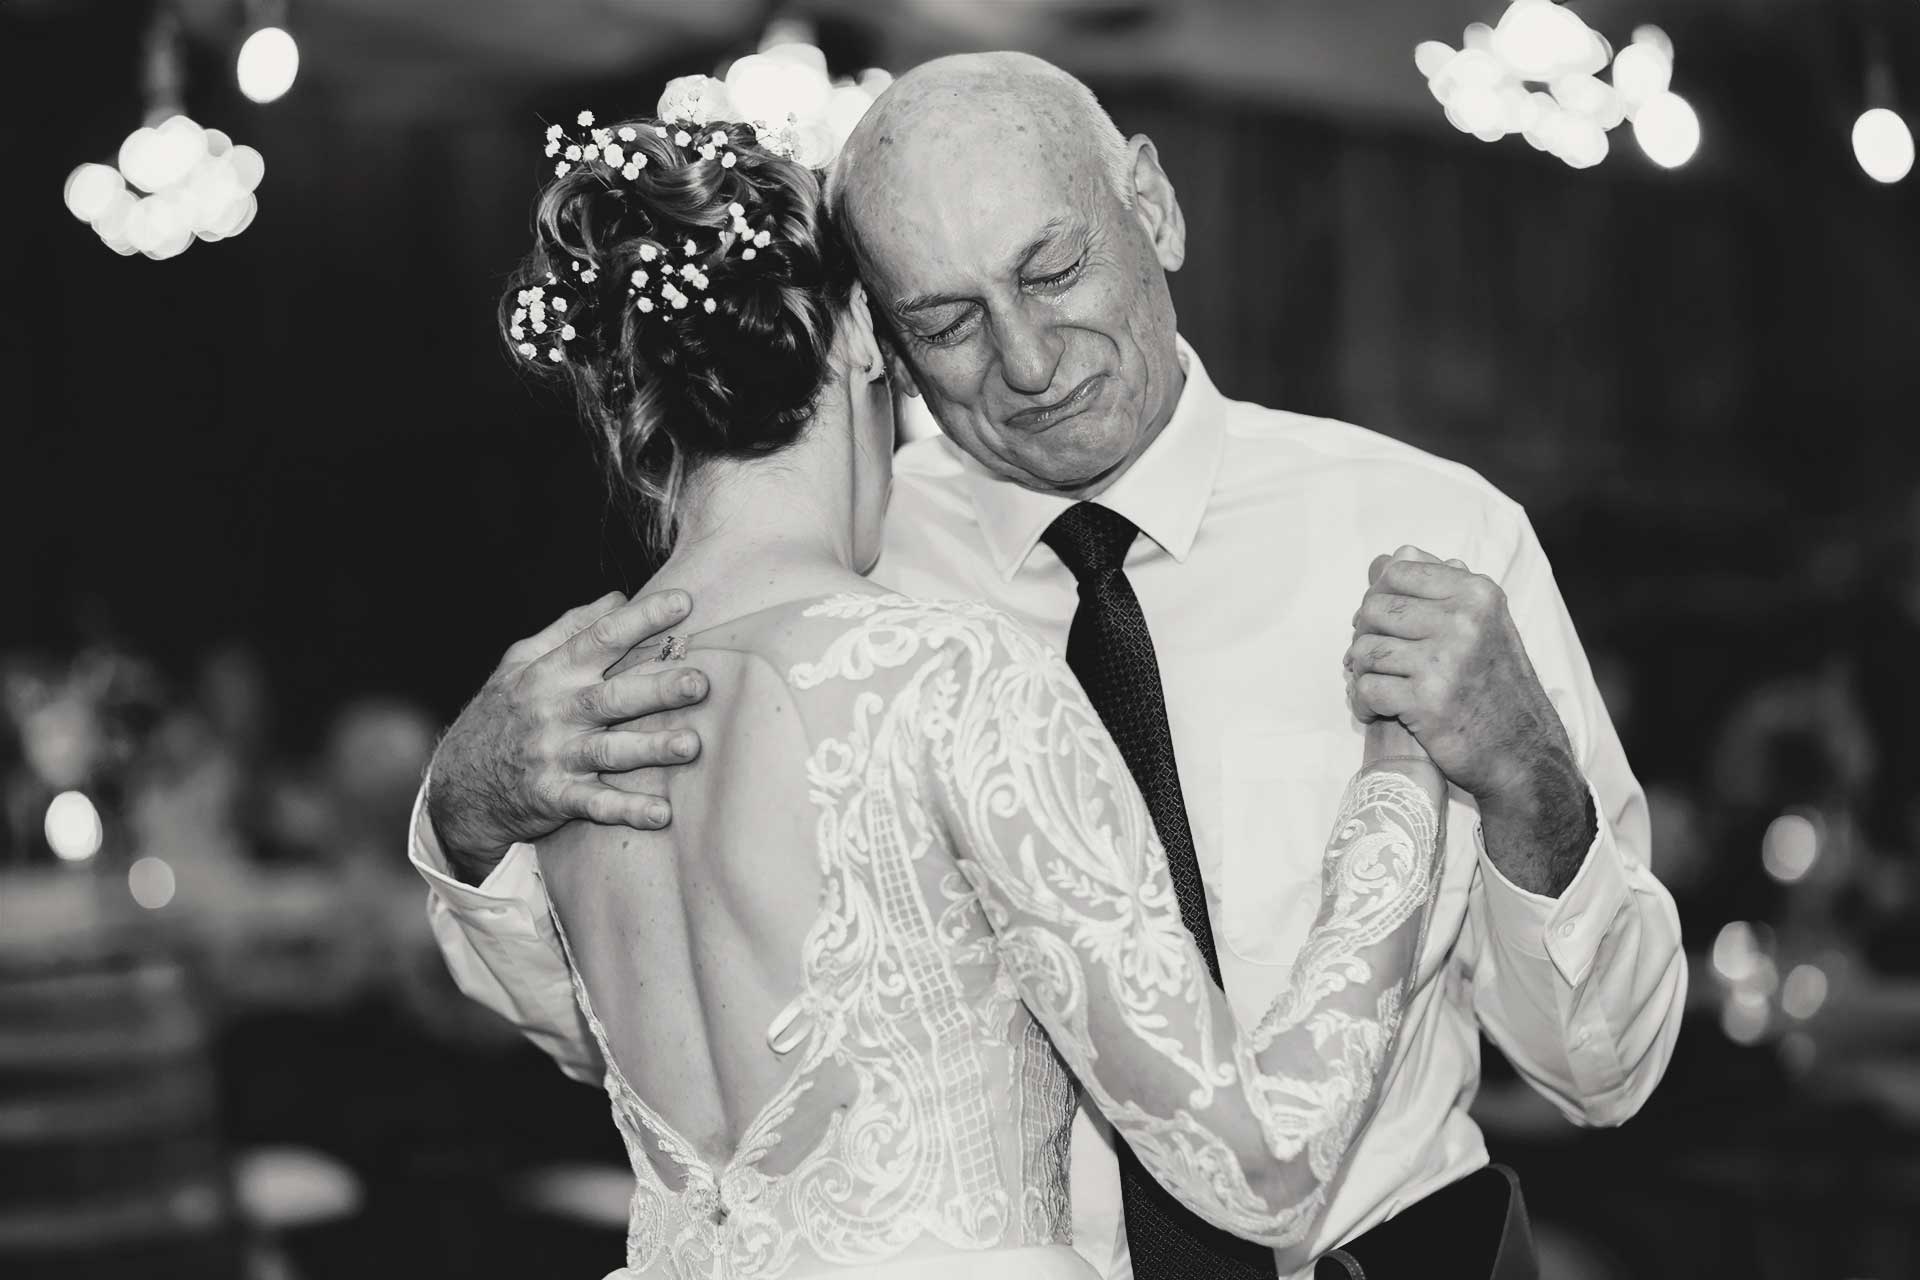 An emotional father fights back tears during the father/daughter dance. Candid documentary photography emphasizes these special heartfelt moment.s